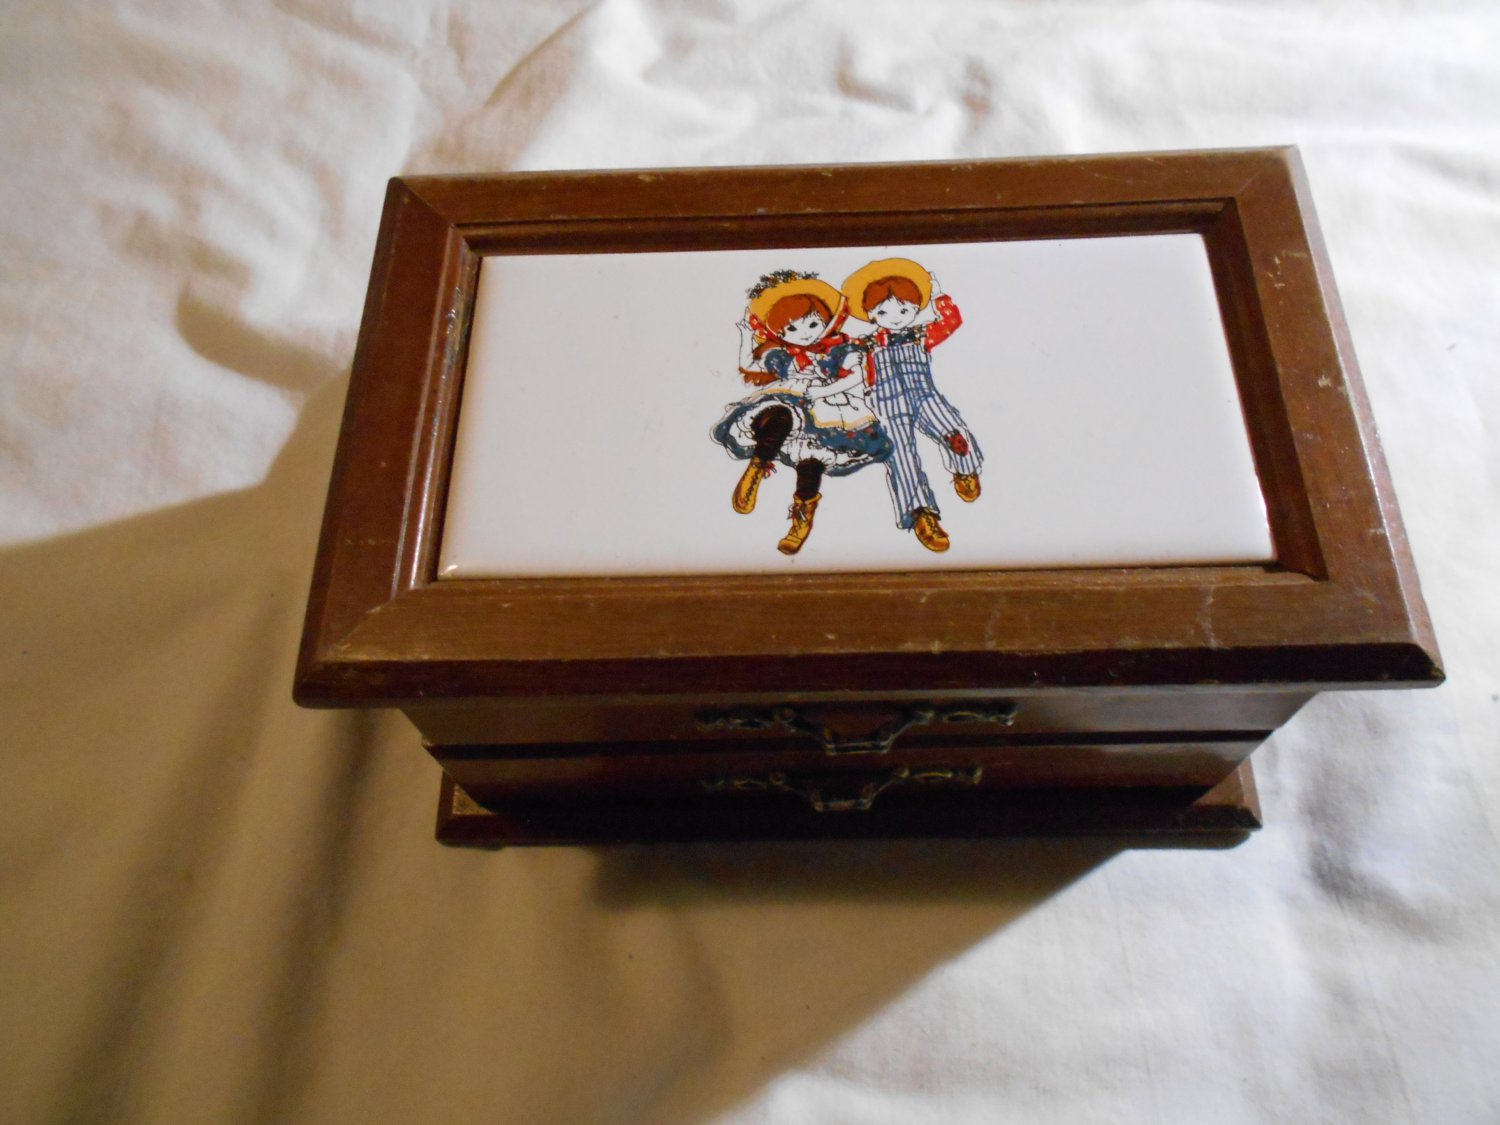 Wooden Jewelry With Boy and Girl in Country Style on White Tile Top (167)